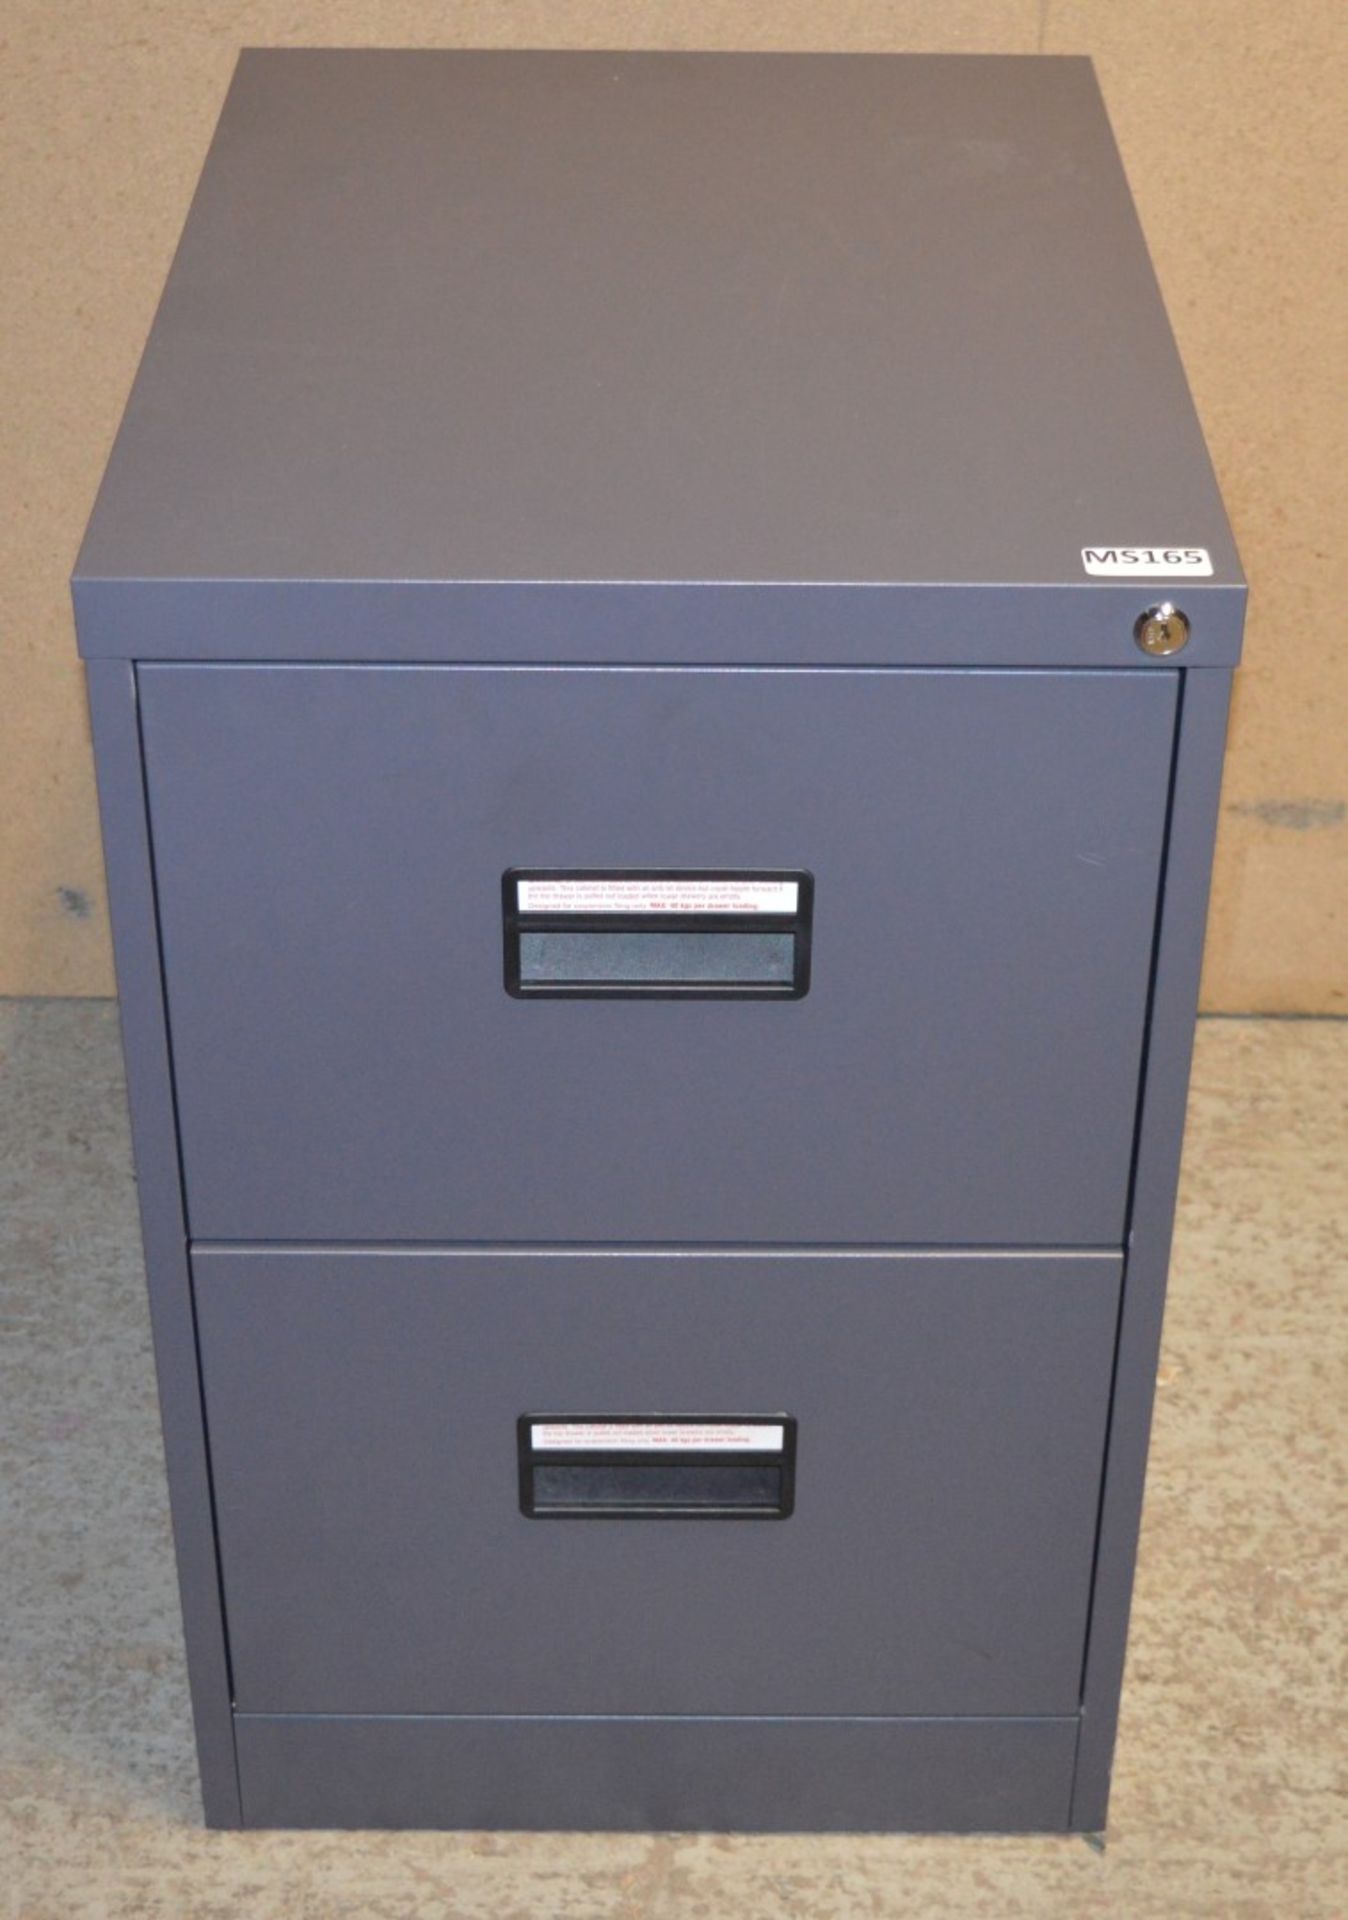 1 x Set of Metal Office Drawers - Contemporary Grey Coated Finish - H72 x W46 x D62 cms - CL282 - - Image 2 of 4